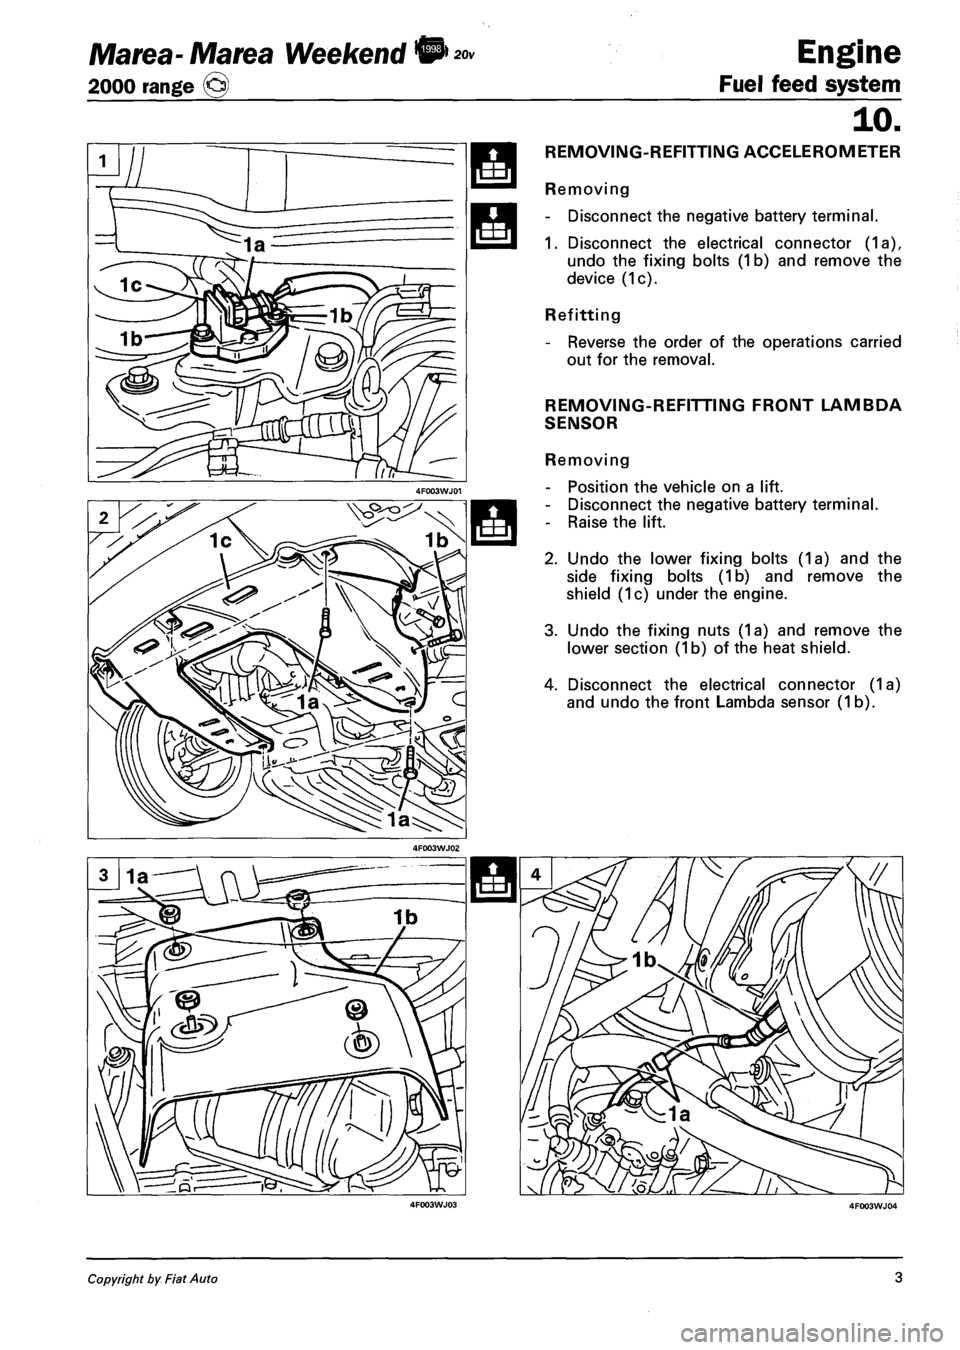 FIAT MAREA 2001 1.G Workshop Manual Marea- Marea Weekend • 
2000 range © 
Engine 
Fuel feed system 
10. 
REMOVING-REFITTING ACCELEROMETER 
Removing 
- Disconnect the negative battery terminal. 
1. Disconnect the electrical connector 